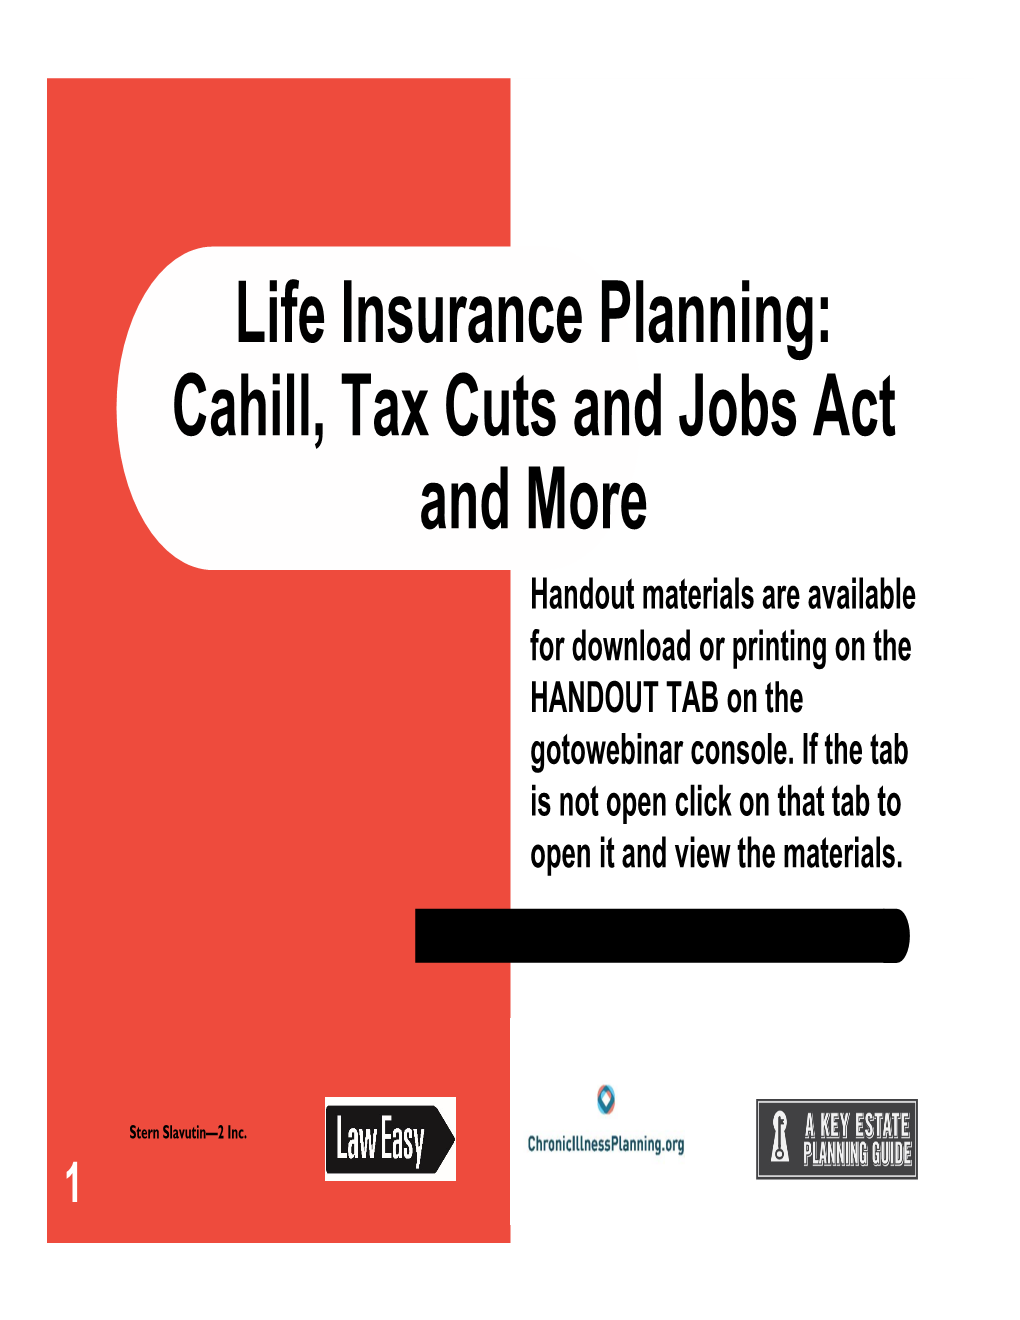 Life Insurance Planning: Cahill, Tax Cuts and Jobs Act and More Handout Materials Are Available for Download Or Printing on the HANDOUT TAB on the Gotowebinar Console